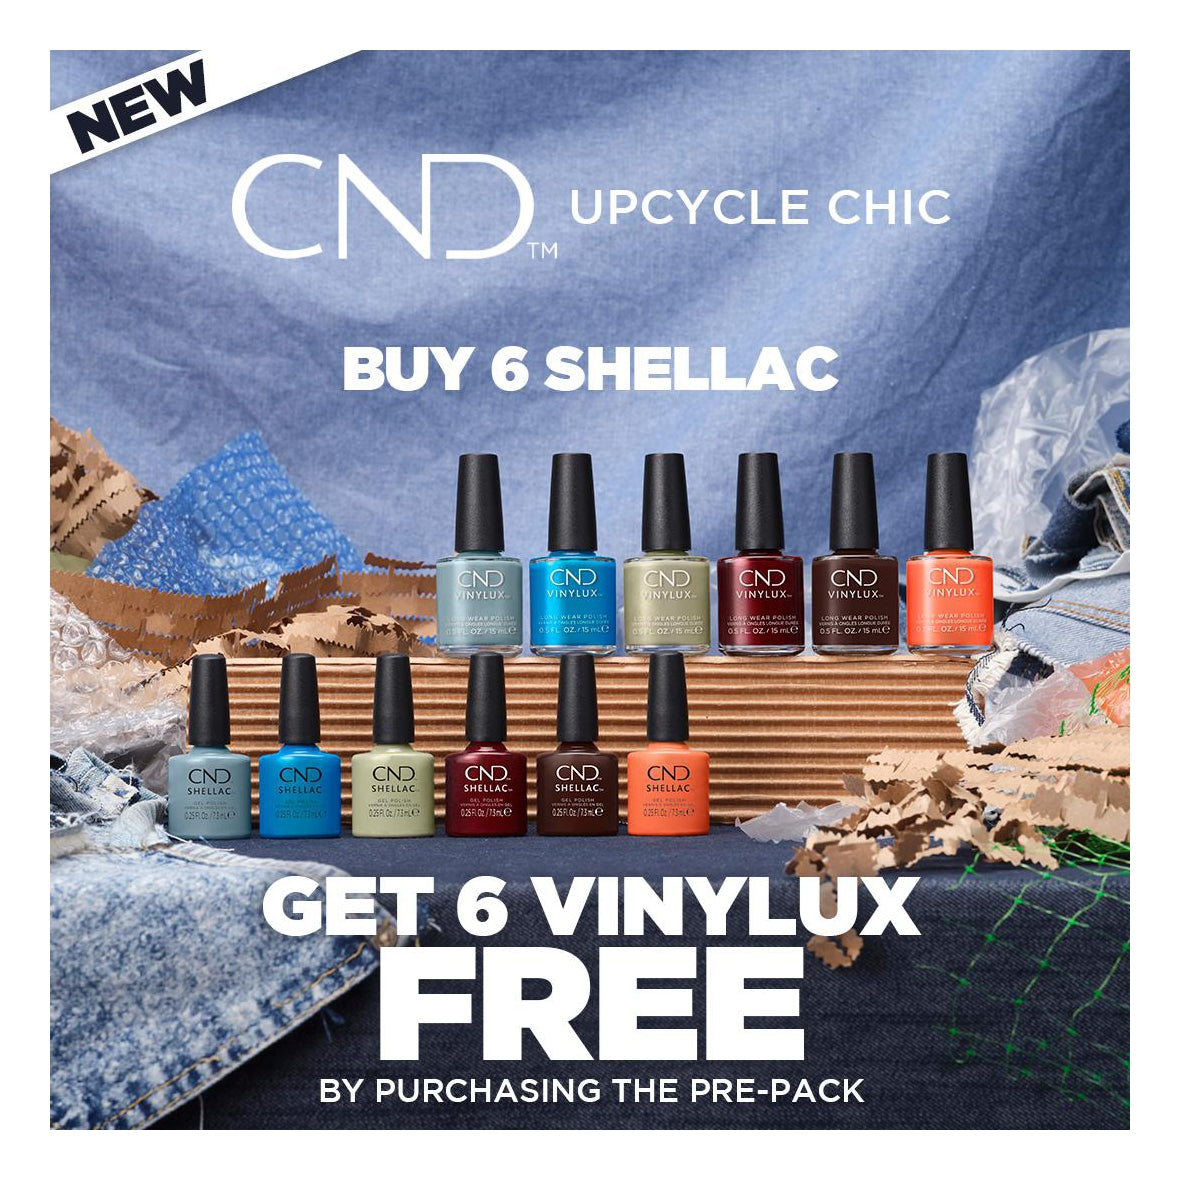 CND Shellac & Vinylux Upcycle Chic Limited Time Deal Pre-Pack